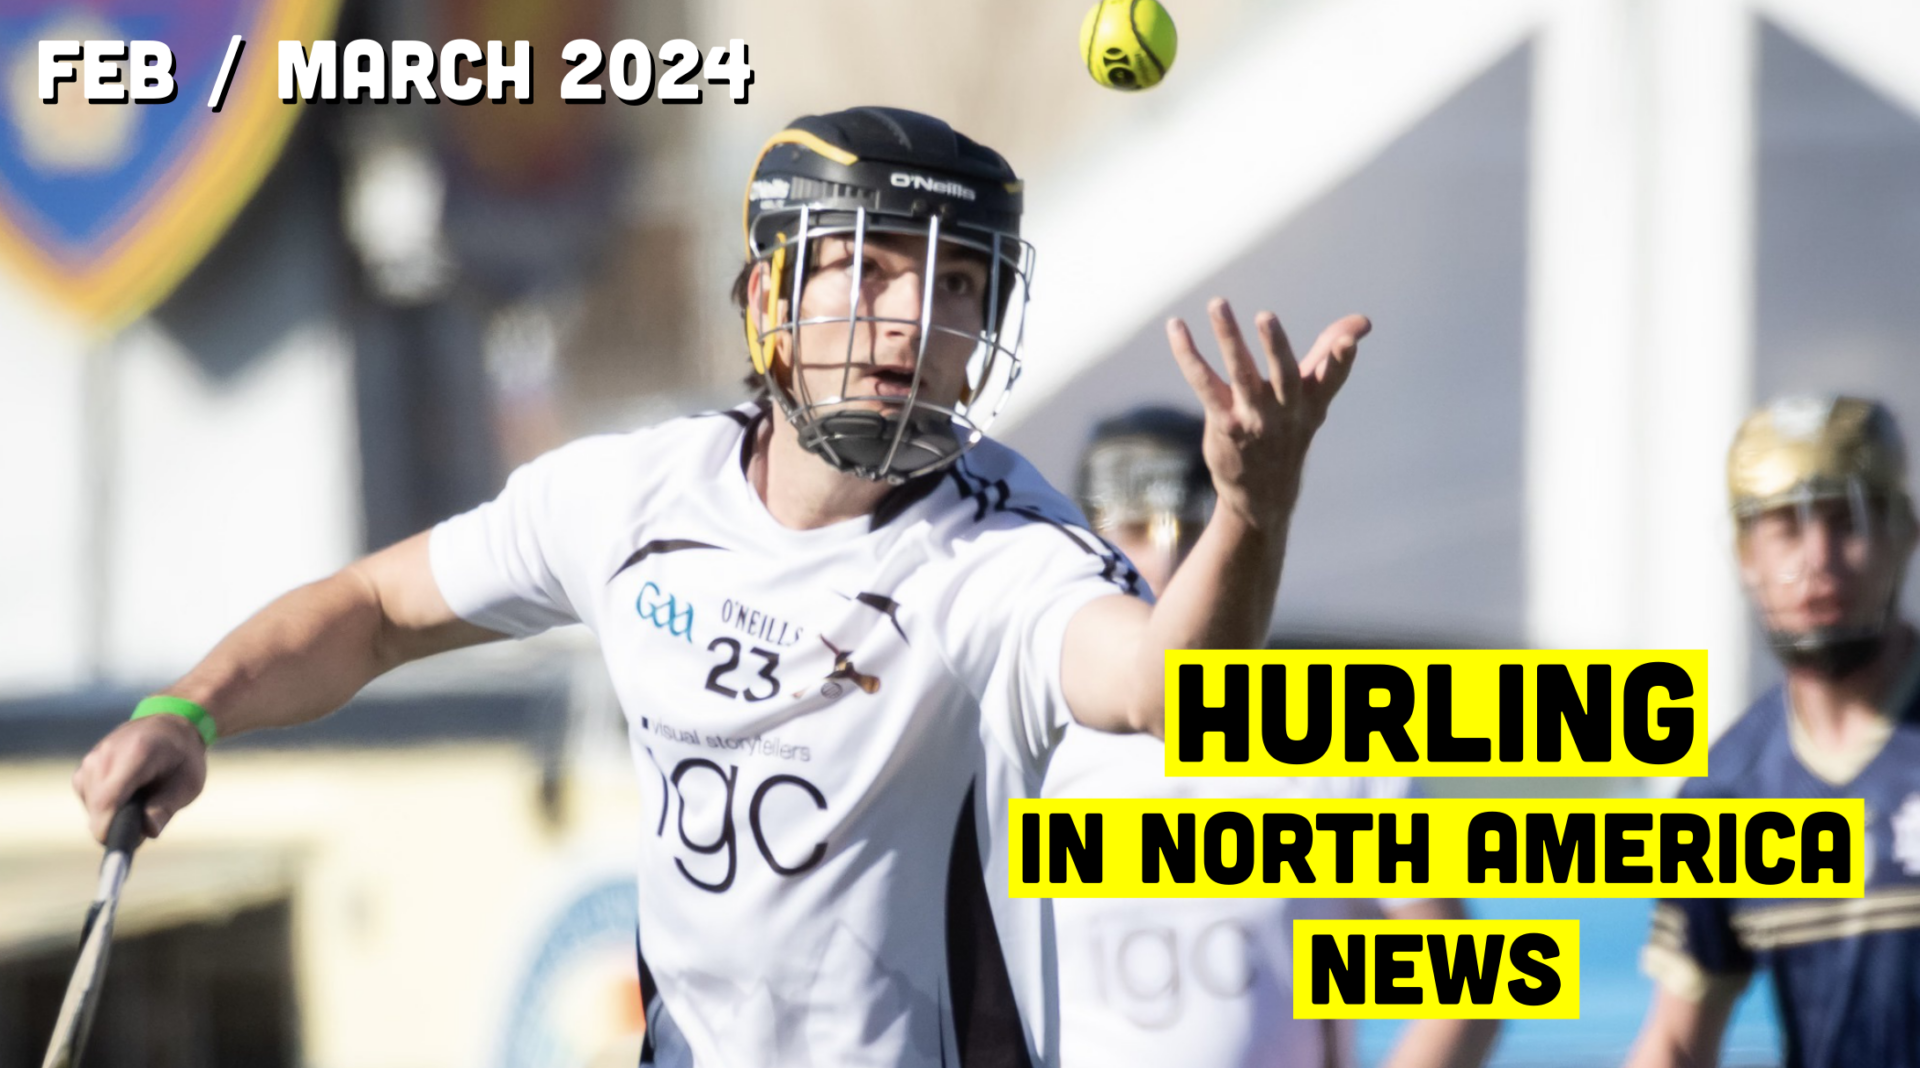 Keep up with the expanding North American Hurling community as we take a look back at February and March 2024. Highlights include: North American College Hurling Finals were broadcasted live on ESPN3, DC Gaels were featured on local news, and Boston College American Football team plays hurling.